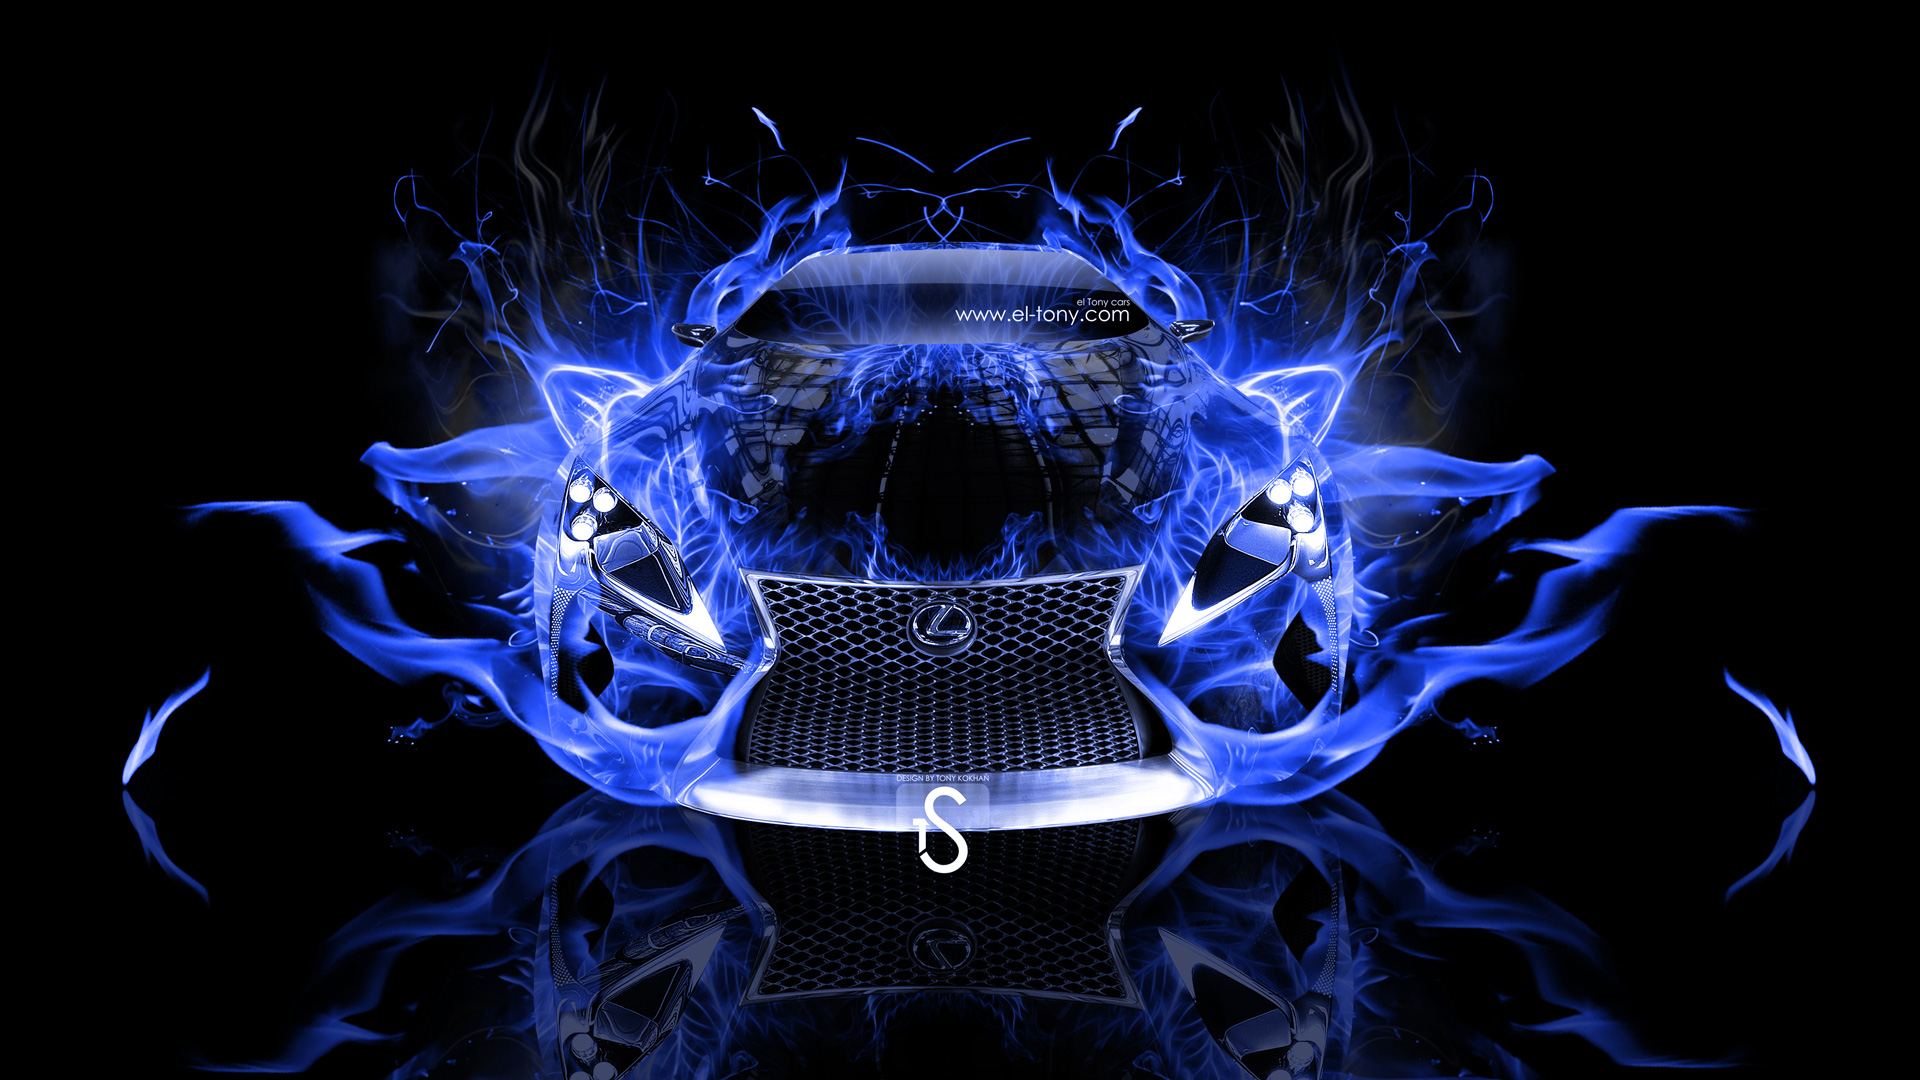 Lexus LF LC Blue Fire Abstract Car 2013 HD Wallpapers design by Tony 1920x1080